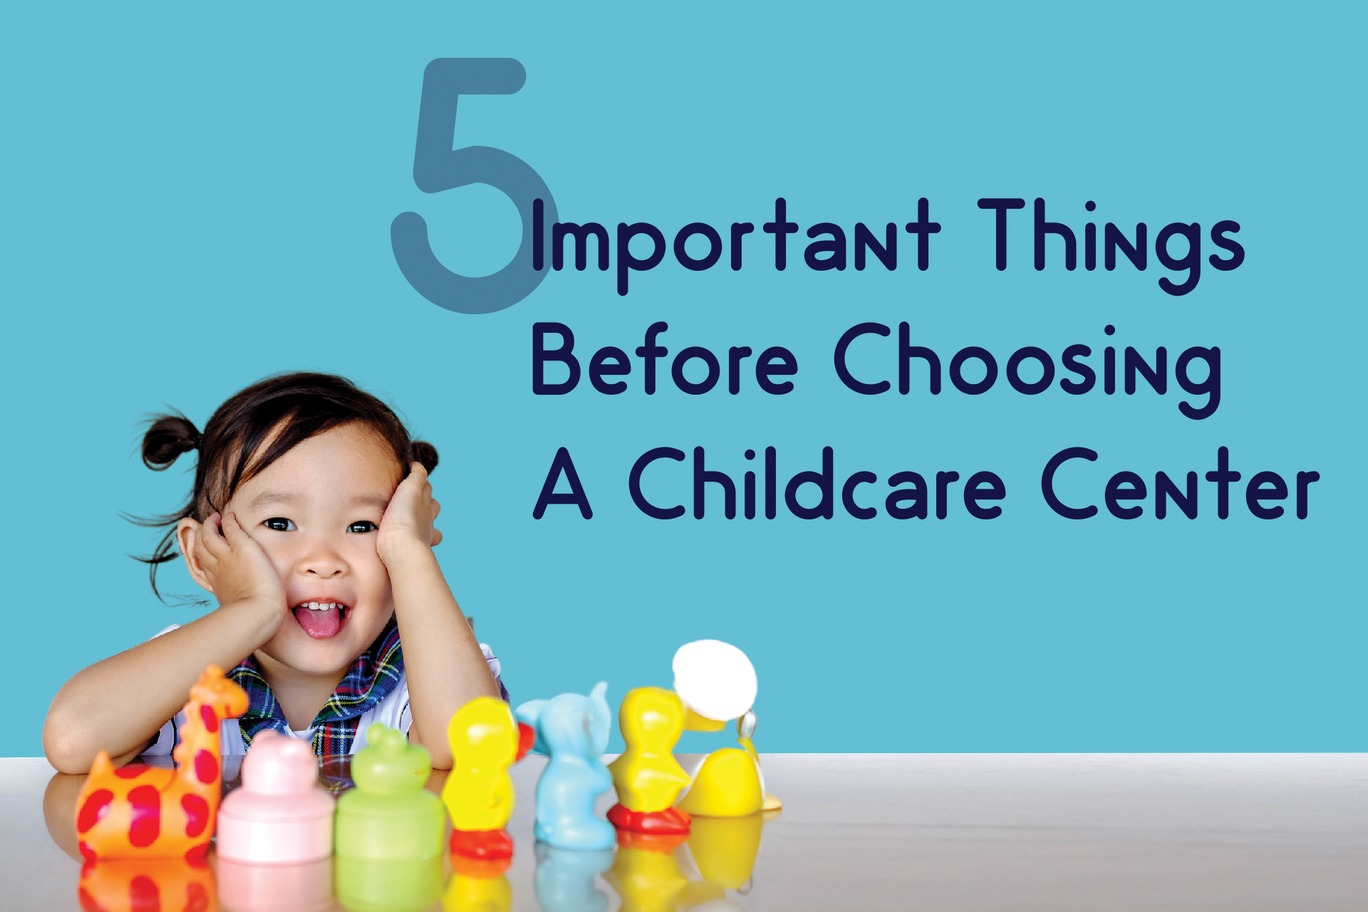 share with you some tips to choose a childcare center